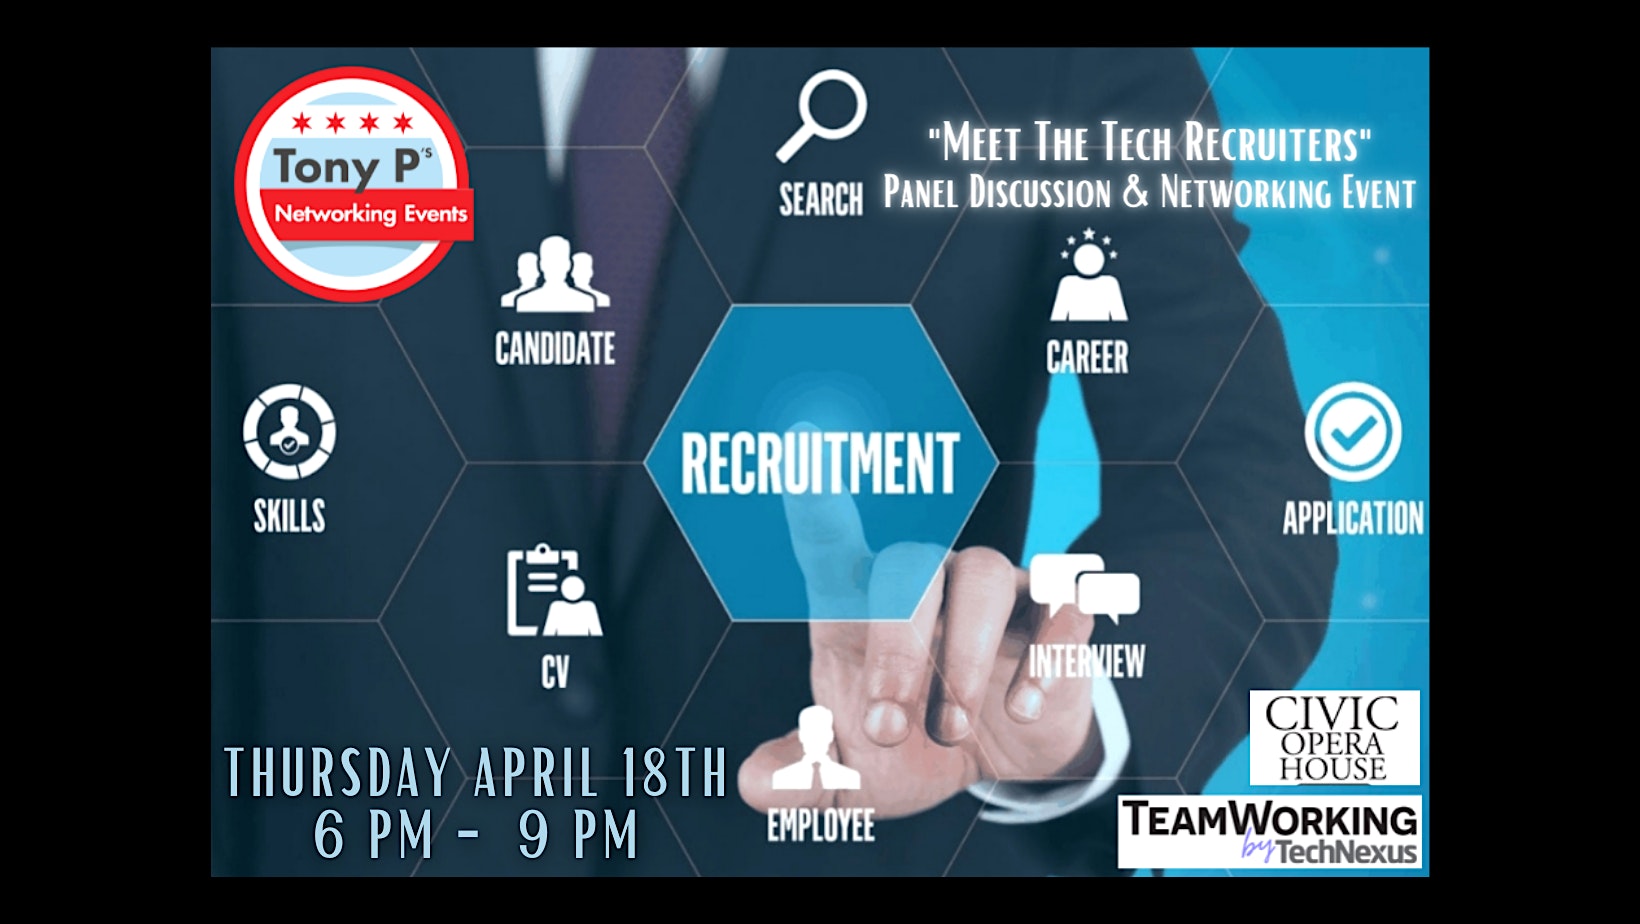 “Meet The Tech Recruiters” Panel Discussion & Networking Event:  April 18th